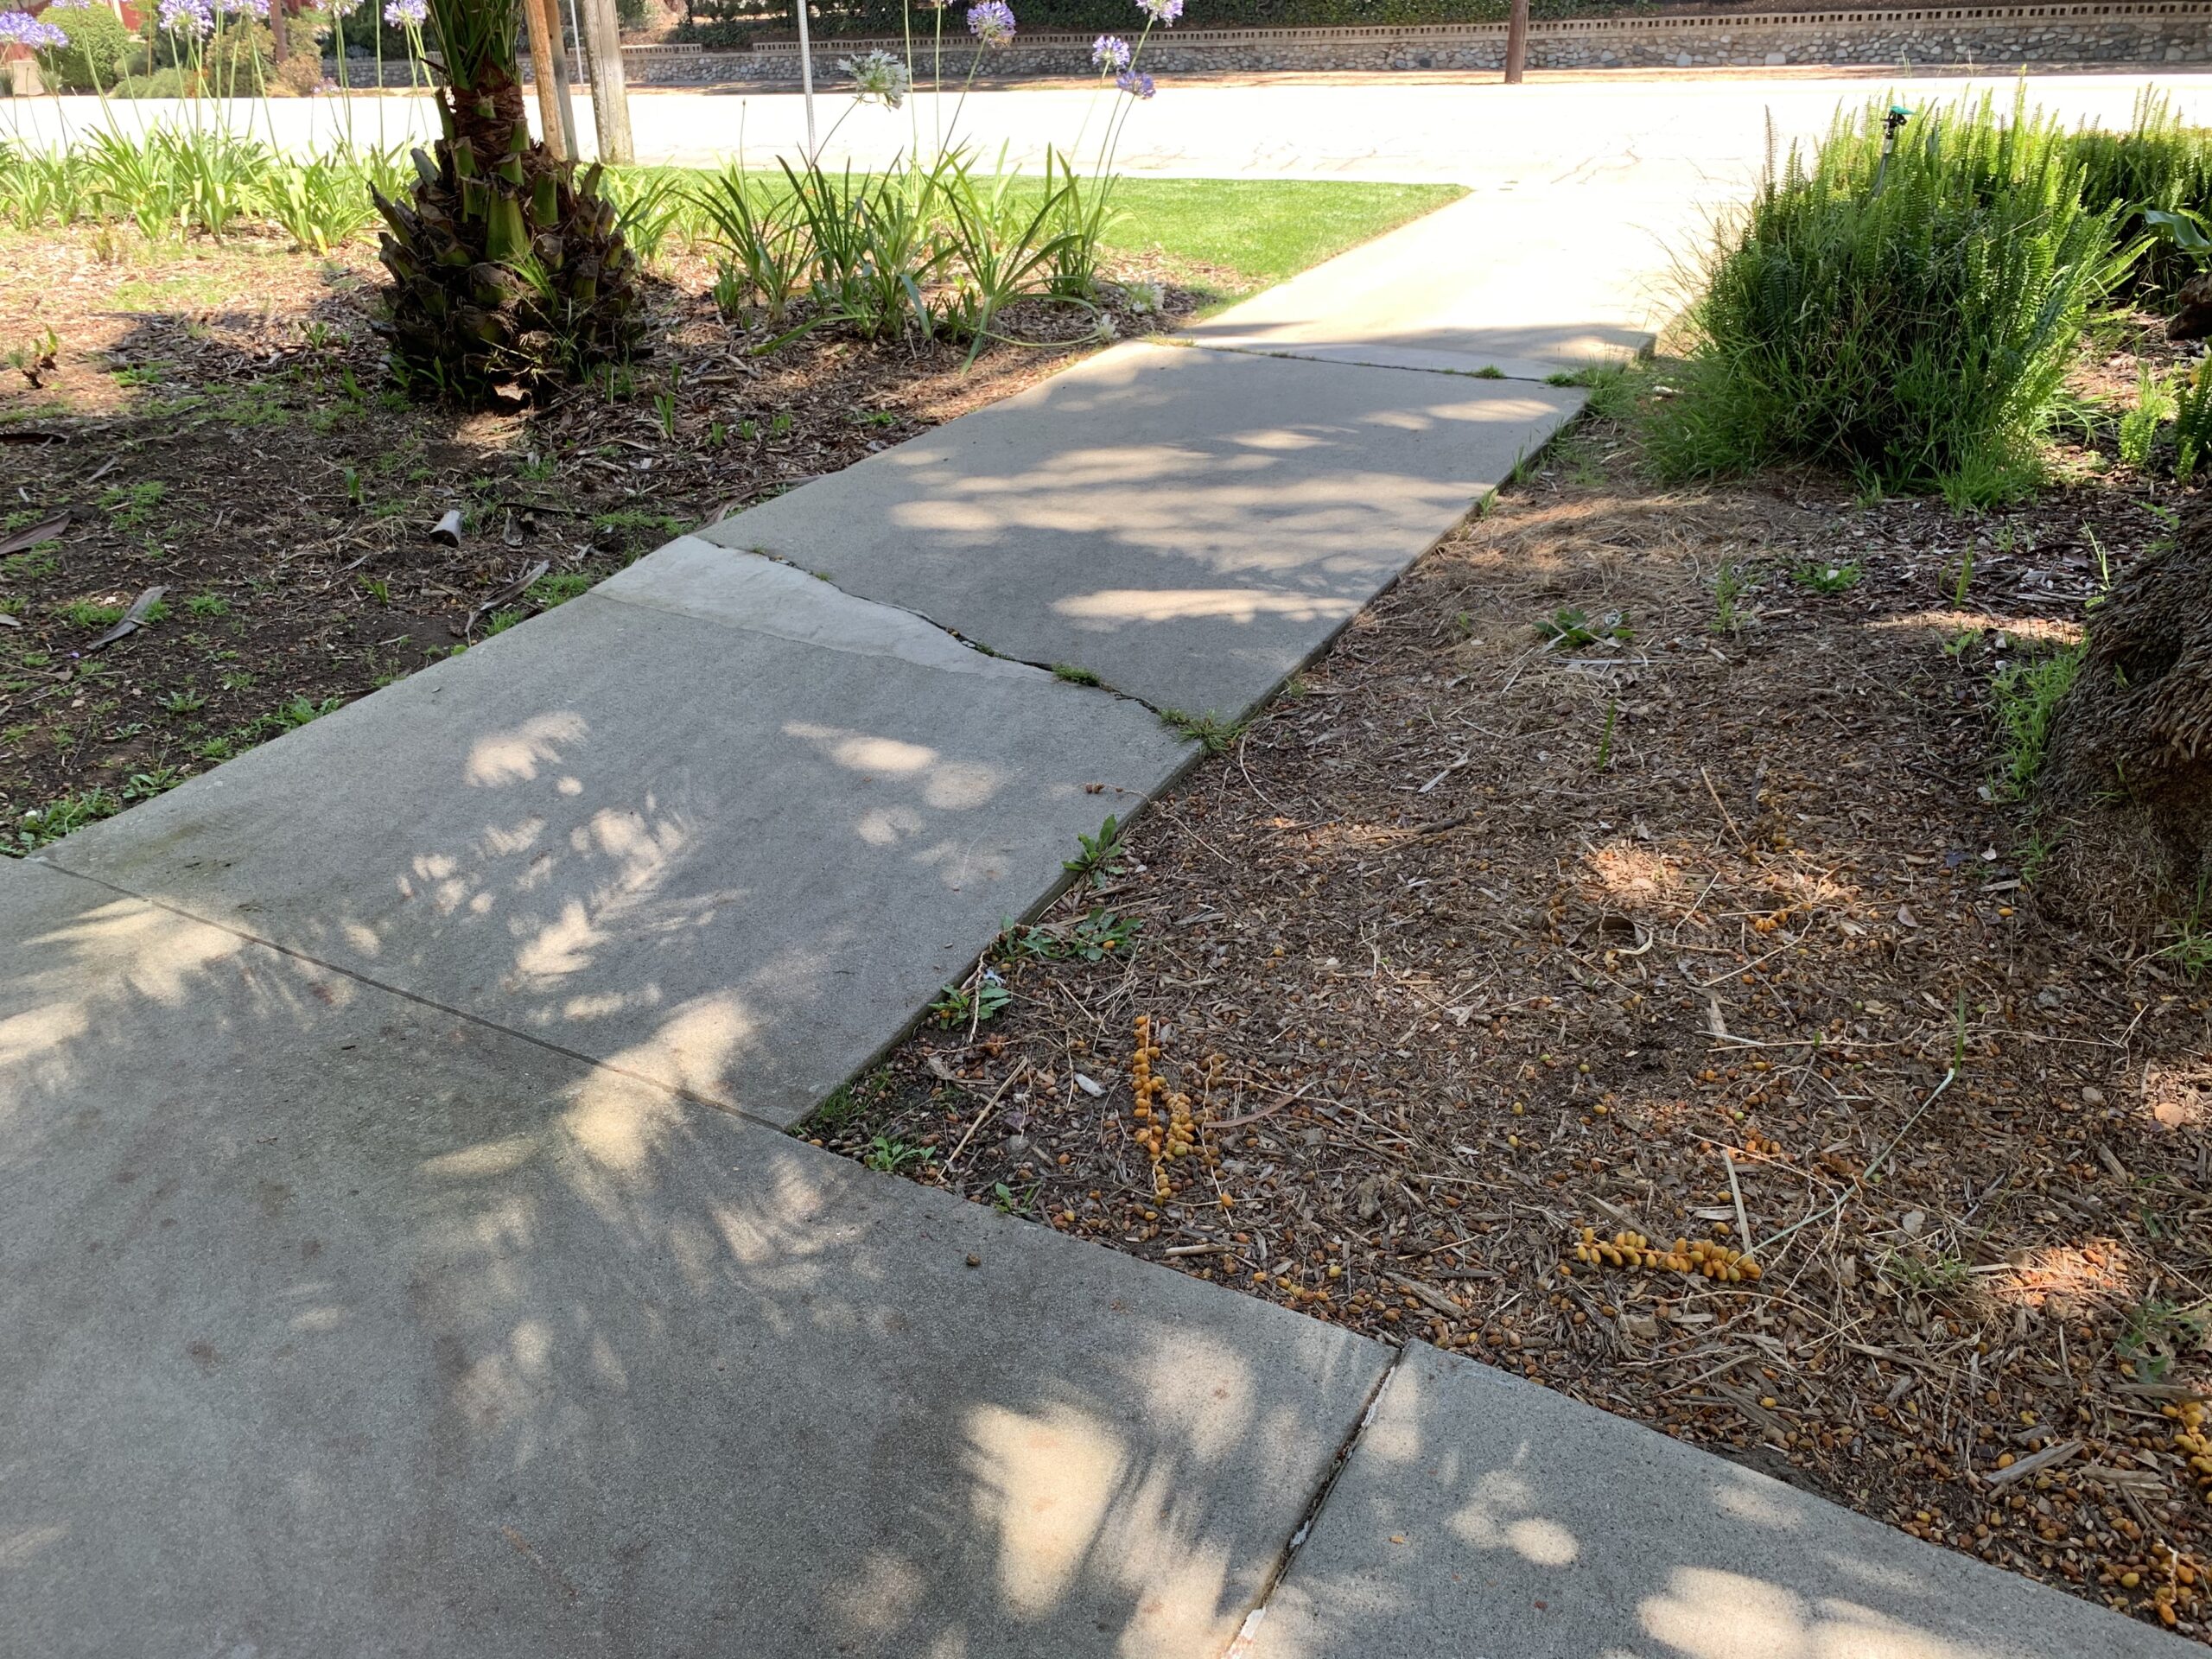 Walkways around library are cracked and uneven